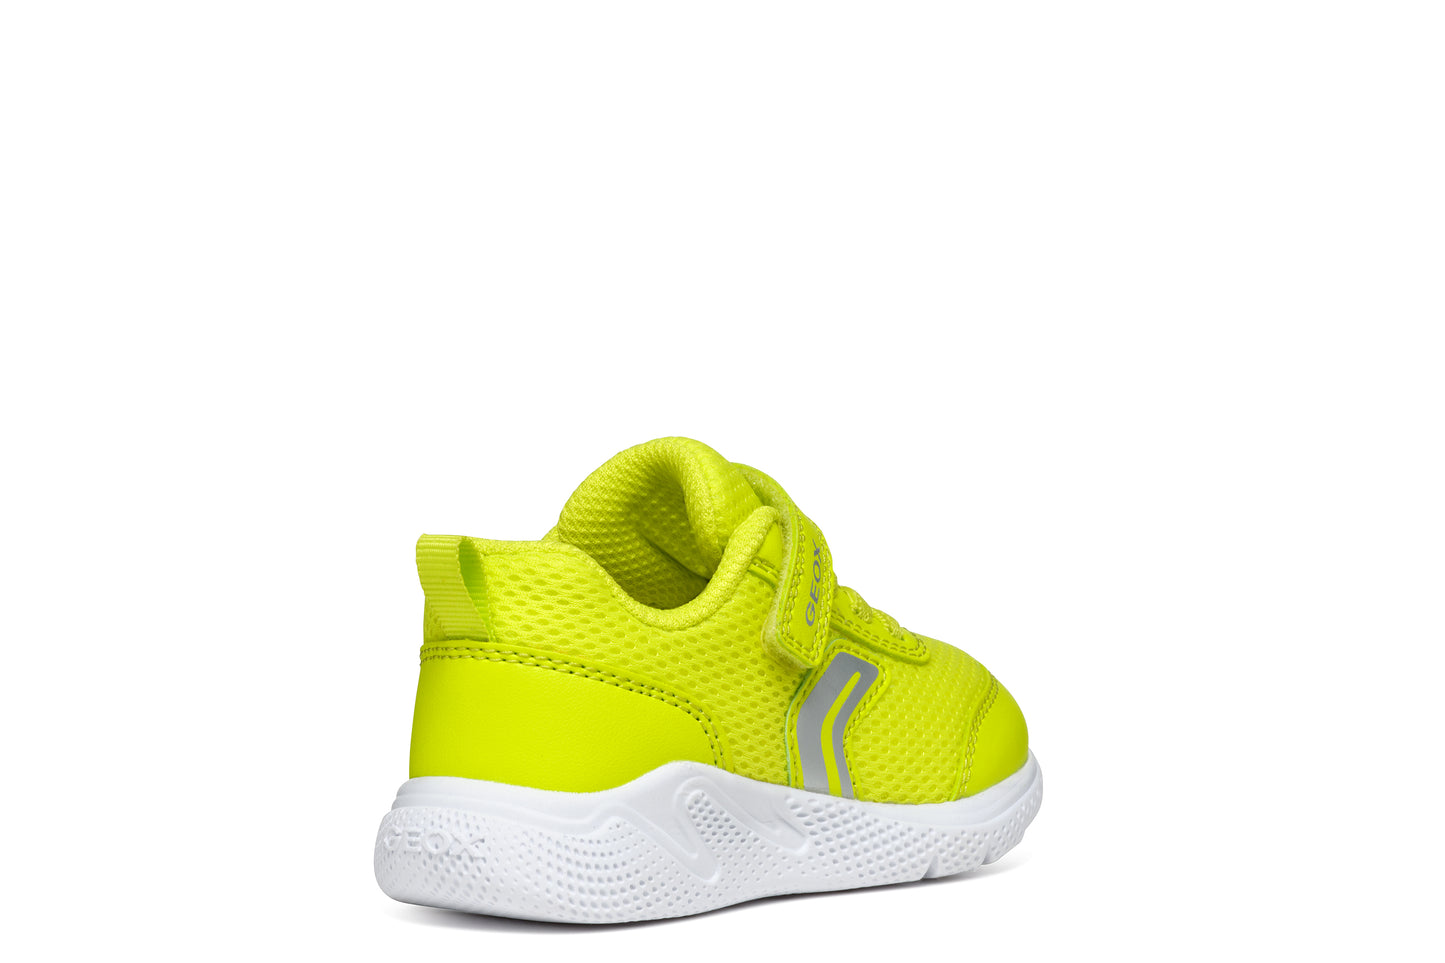 A unisex trainer by Geox, style B Sprintye, in fluorescent green with bungee lace and velcro fastening. Angled view of right side.